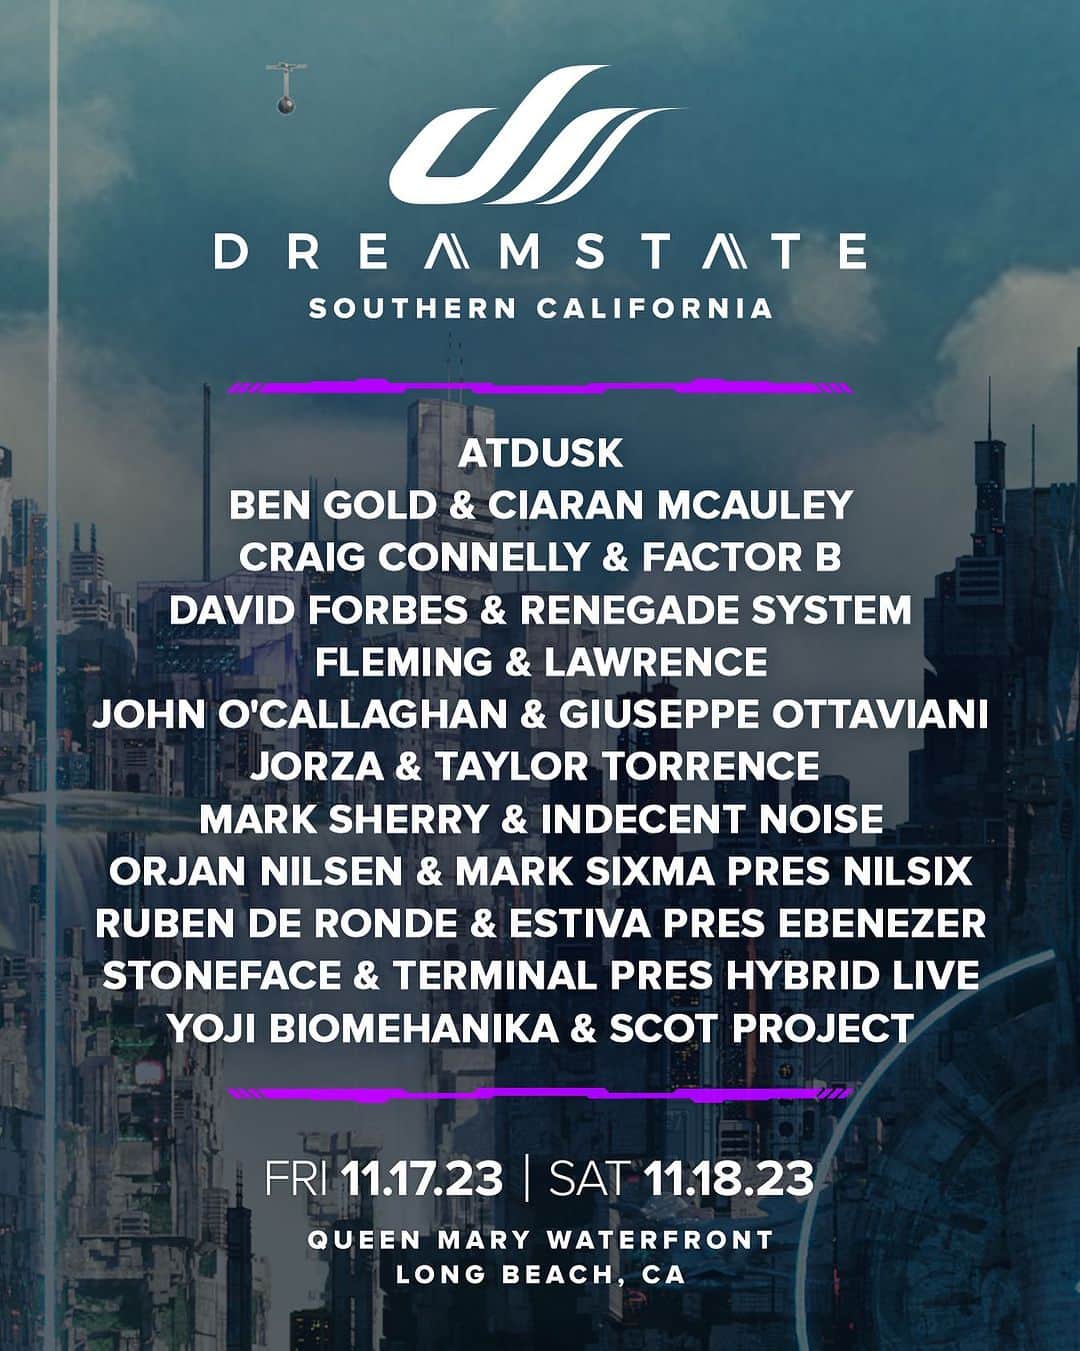 YOJI BIOMEHANIKAのインスタグラム：「I am very excited to announce that I will be performing with the Scot Project at Dreamstate Socal in November! See you in Long Beach, Dreamers!」